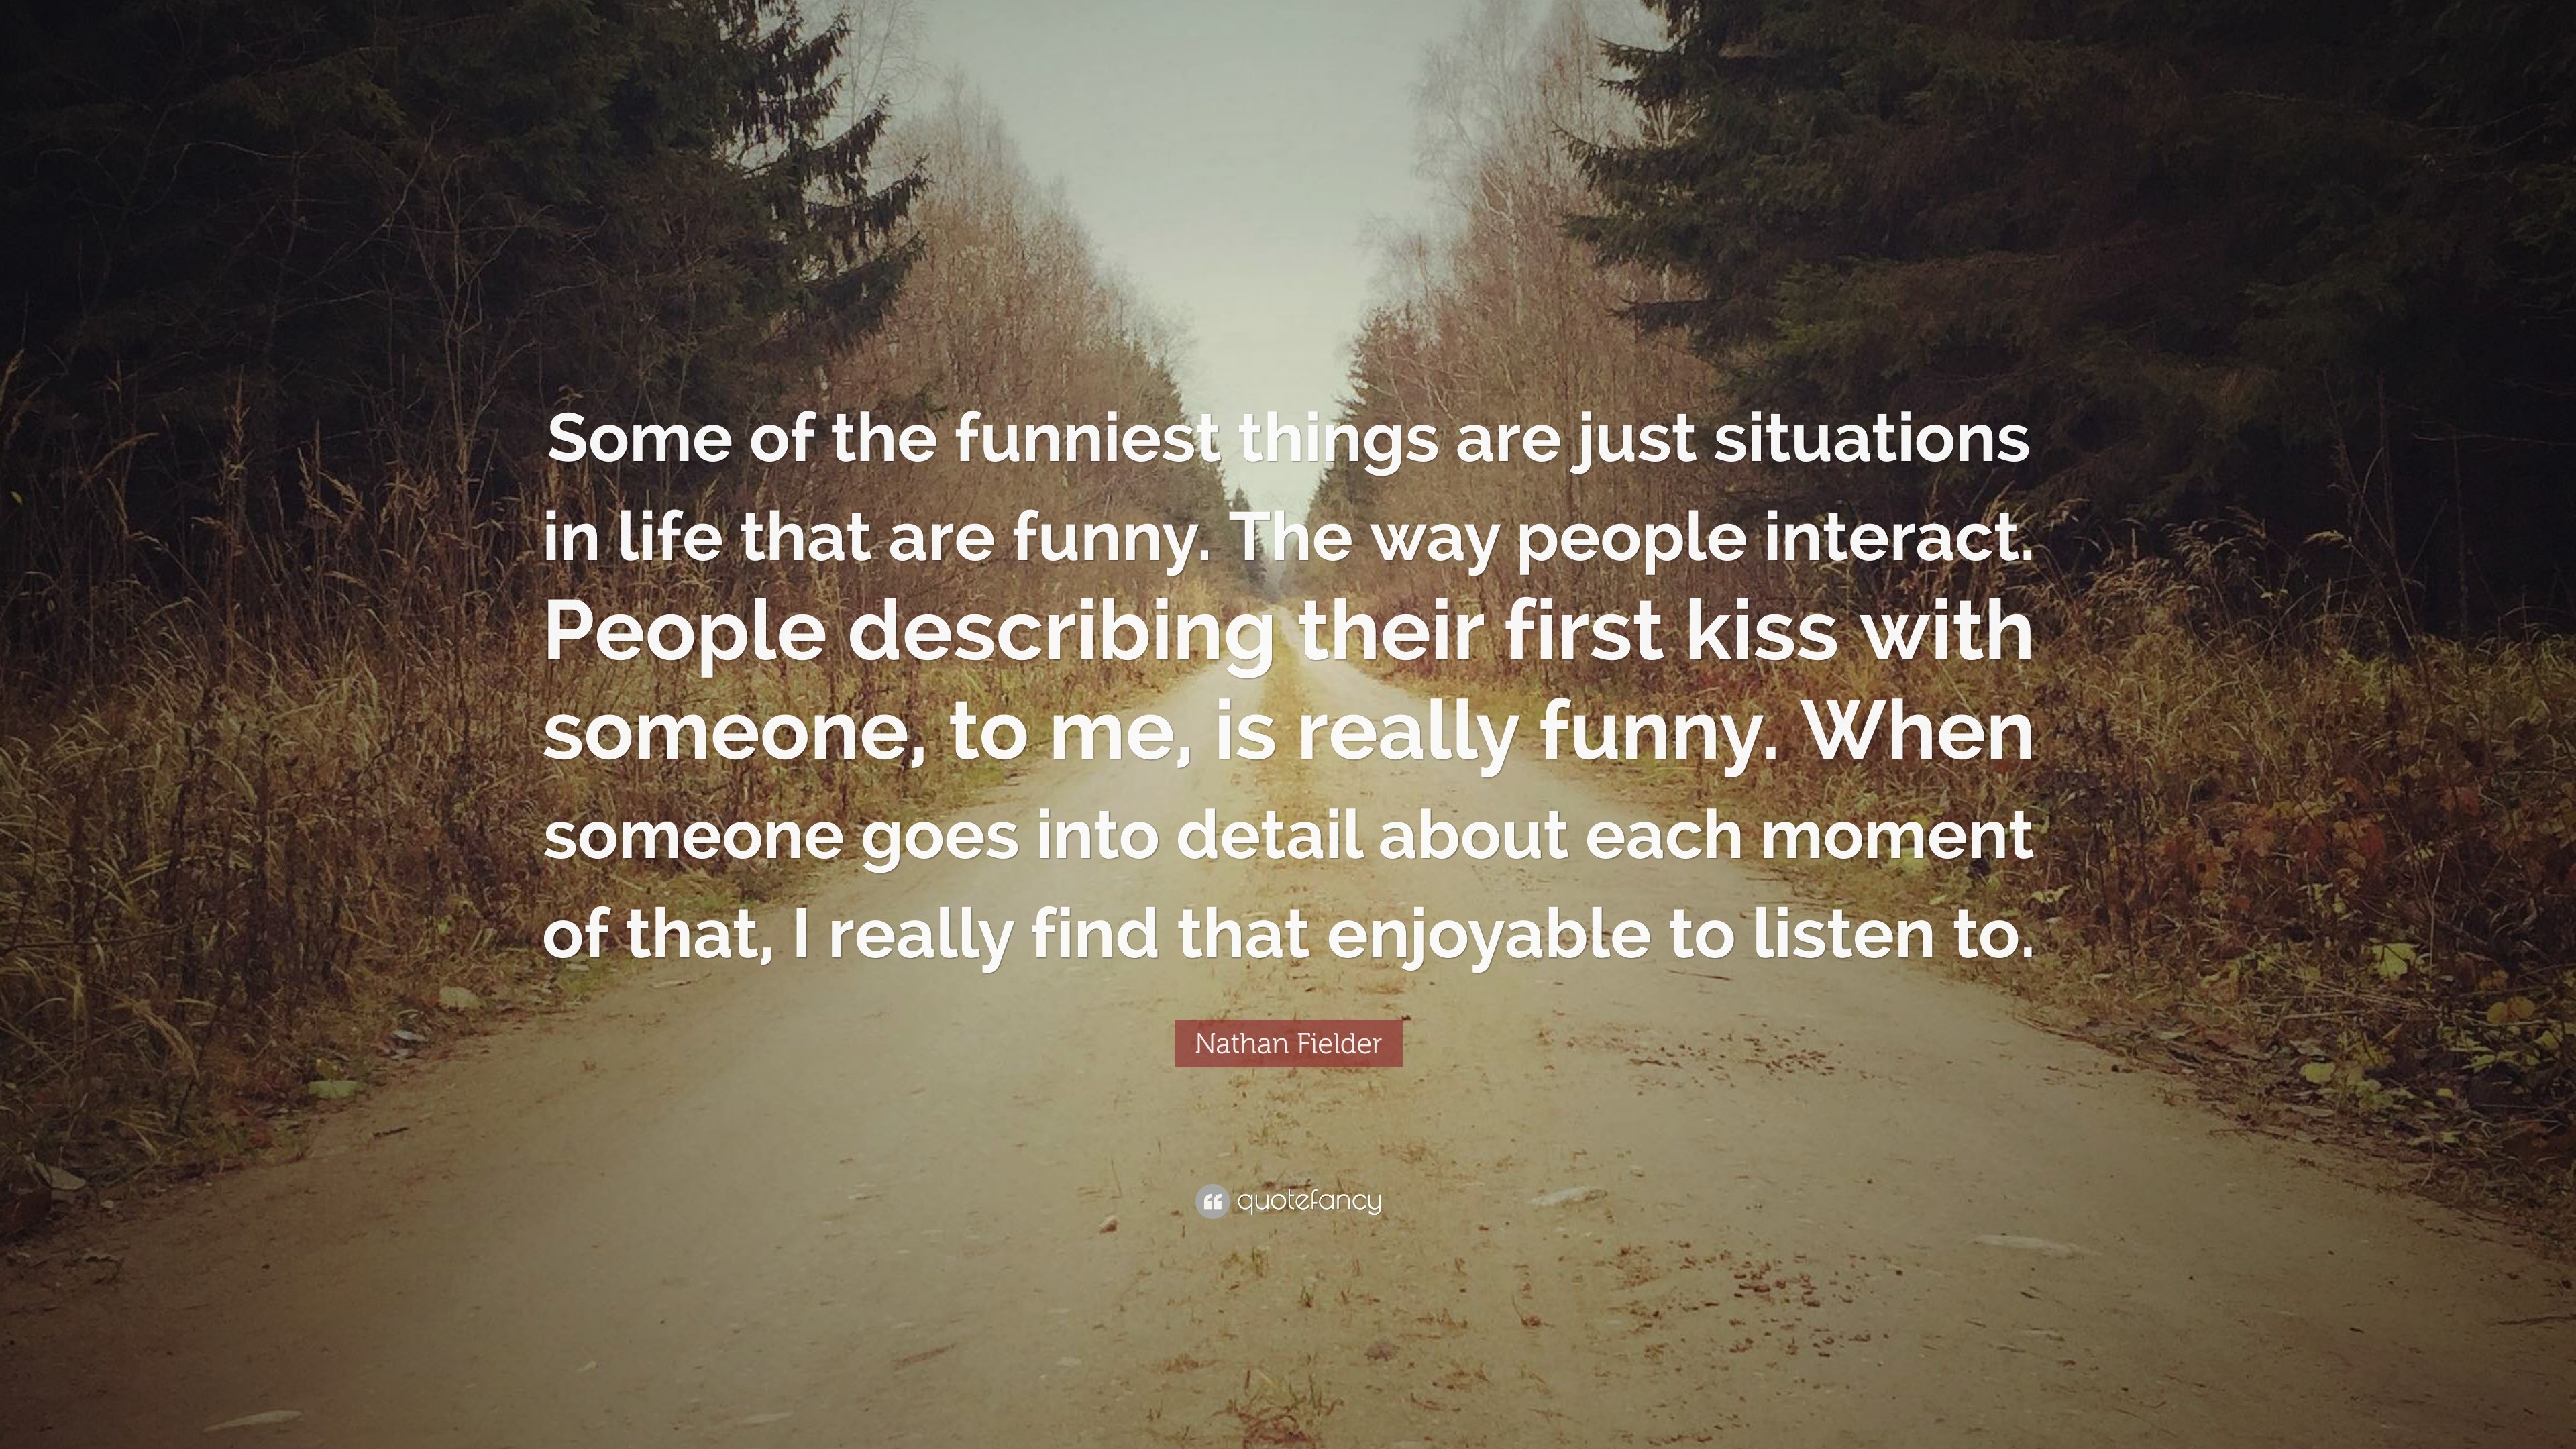 Nathan Fielder Quote: “Some of the funniest things are just situations in  life that are funny. The way people interact. People describing their...”